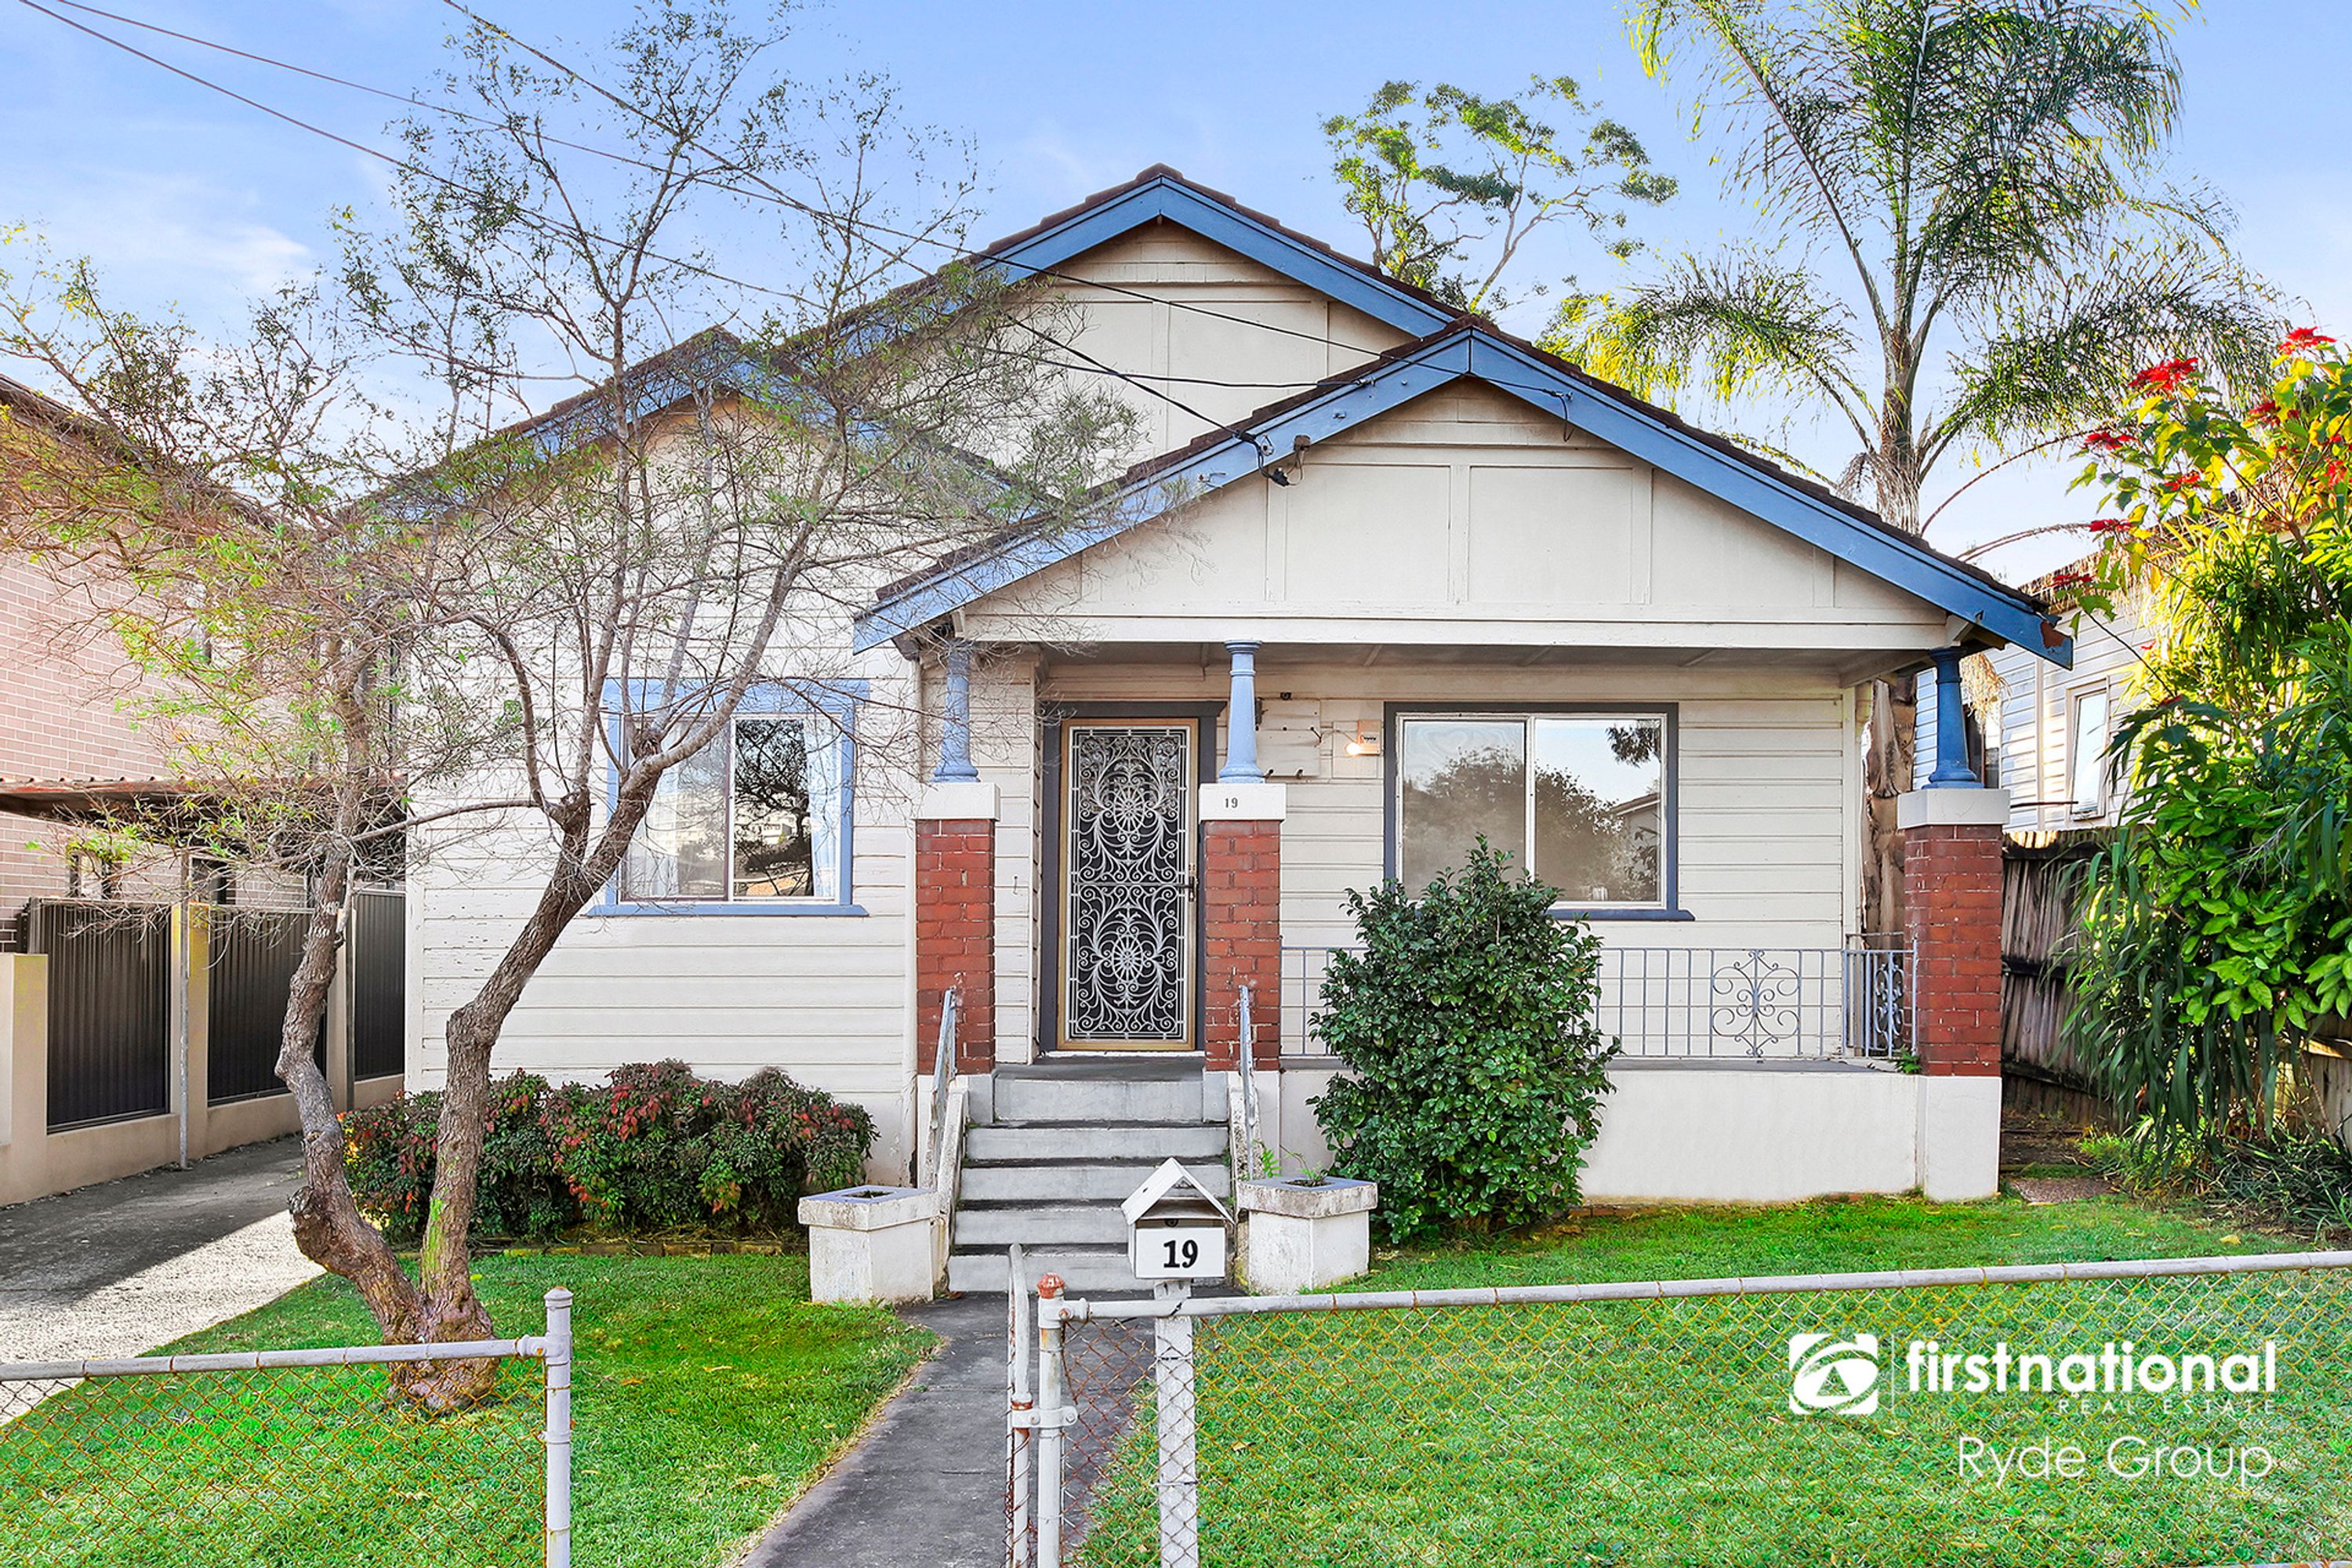 19. Griffiths Avenue, West Ryde, NSW 2114